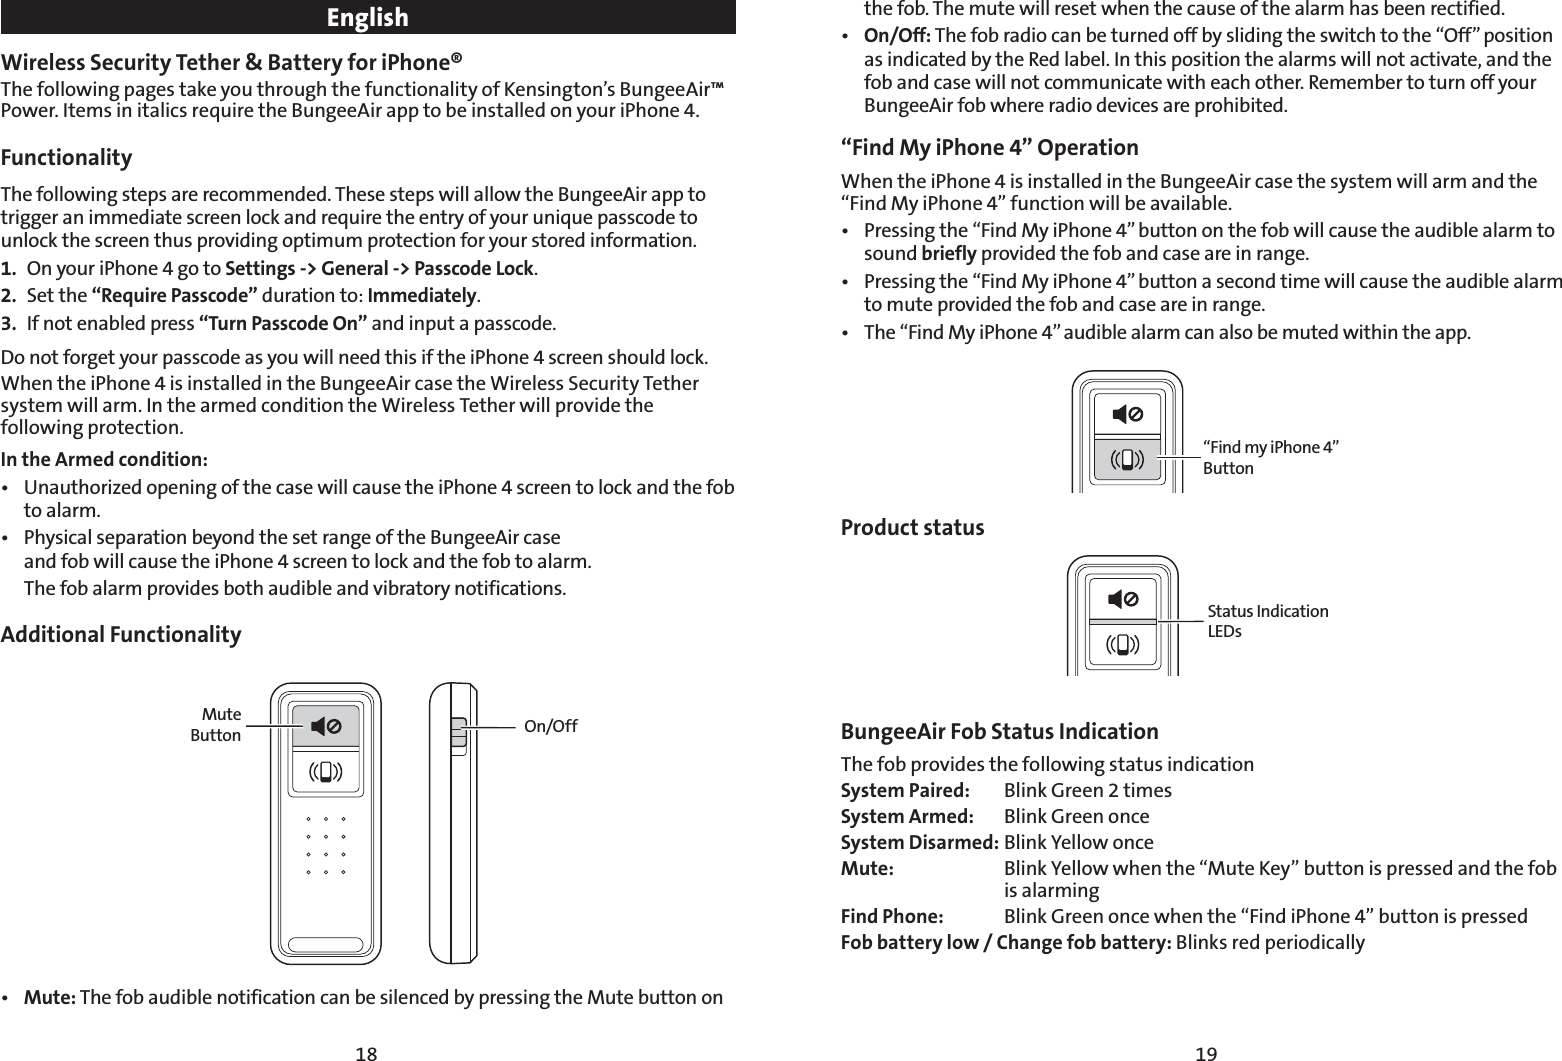 1918EnglishWireless Security Tether &amp; Battery for iPhone® The following pages take you through the functionality of Kensington’s BungeeAir™ Power. Items in italics require the BungeeAir app to be installed on your iPhone 4.Functionality  The following steps are recommended. These steps will allow the BungeeAir app to trigger an immediate screen lock and require the entry of your unique passcode to unlock the screen thus providing optimum protection for your stored information. 1.  On your iPhone 4 go to Settings -&gt; General -&gt; Passcode Lock.2. Set the “Require Passcode” duration to: Immediately.3.  If not enabled press “Turn Passcode On” and input a passcode.Do not forget your passcode as you will need this if the iPhone 4 screen should lock.When the iPhone 4 is installed in the BungeeAir case the Wireless Security Tether system will arm. In the armed condition the Wireless Tether will provide the following protection.  In the Armed condition:t 6OBVUIPSJ[FEPQFOJOHPGUIFDBTFXJMMDBVTFUIFJ1IPOFTDSFFOUPMPDLBOEUIFGPCto alarm.t 1IZTJDBMTFQBSBUJPOCFZPOEUIFTFUSBOHFPGUIF#VOHFF&quot;JSDBTF and fob will cause the iPhone 4 screen to lock and the fob to alarm.    The fob alarm provides both audible and vibratory notifications. Additional FunctionalityMute Button On/Offt Mute: The fob audible notification can be silenced by pressing the Mute button on the fob. The mute will reset when the cause of the alarm has been rectified.     t On/Off: The fob radio can be turned off by sliding the switch to the “Off” position as indicated by the Red label. In this position the alarms will not activate, and the fob and case will not communicate with each other. Remember to turn off your BungeeAir fob where radio devices are prohibited.“Find My iPhone 4” Operation When the iPhone 4 is installed in the BungeeAir case the system will arm and the “Find My iPhone 4” function will be available. t 1SFTTJOHUIFi&apos;JOE.ZJ1IPOFwCVUUPOPOUIFGPCXJMMDBVTFUIFBVEJCMFBMBSNUPsound briefly provided the fob and case are in range. t 1SFTTJOHUIFi&apos;JOE.ZJ1IPOFwCVUUPOBTFDPOEUJNFXJMMDBVTFUIFBVEJCMFBMBSNto mute provided the fob and case are in range.t 5IFi&apos;JOE.ZJ1IPOFwBVEJCMFBMBSNDBOBMTPCFNVUFEXJUIJOUIFBQQ“Find my iPhone 4” ButtonProduct statusStatus Indication LEDsBungeeAir Fob Status Indication  The fob provides the following status indicationSystem Paired:  Blink Green 2 timesSystem Armed:  Blink Green onceSystem Disarmed: Blink Yellow onceMute:  Blink Yellow when the “Mute Key” button is pressed and the fob  is alarmingFind Phone:  Blink Green once when the “Find iPhone 4” button is pressedFob battery low / Change fob battery: Blinks red periodically